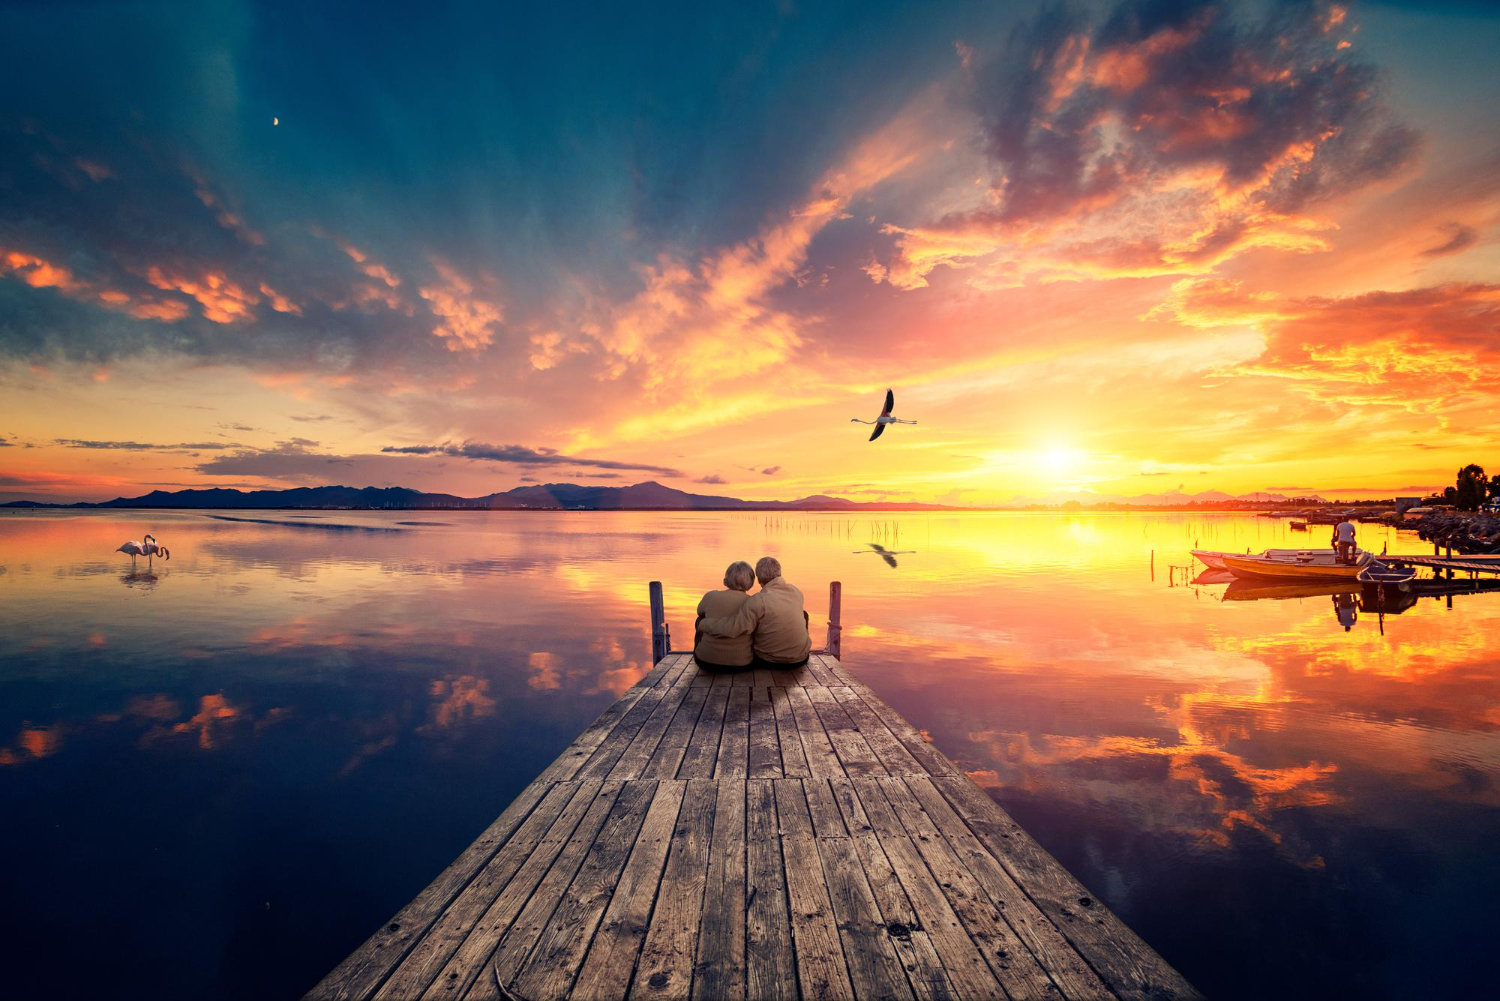 A serene and picturesque image of a serene sunset, symbolizing life's peaceful and beautiful moments.